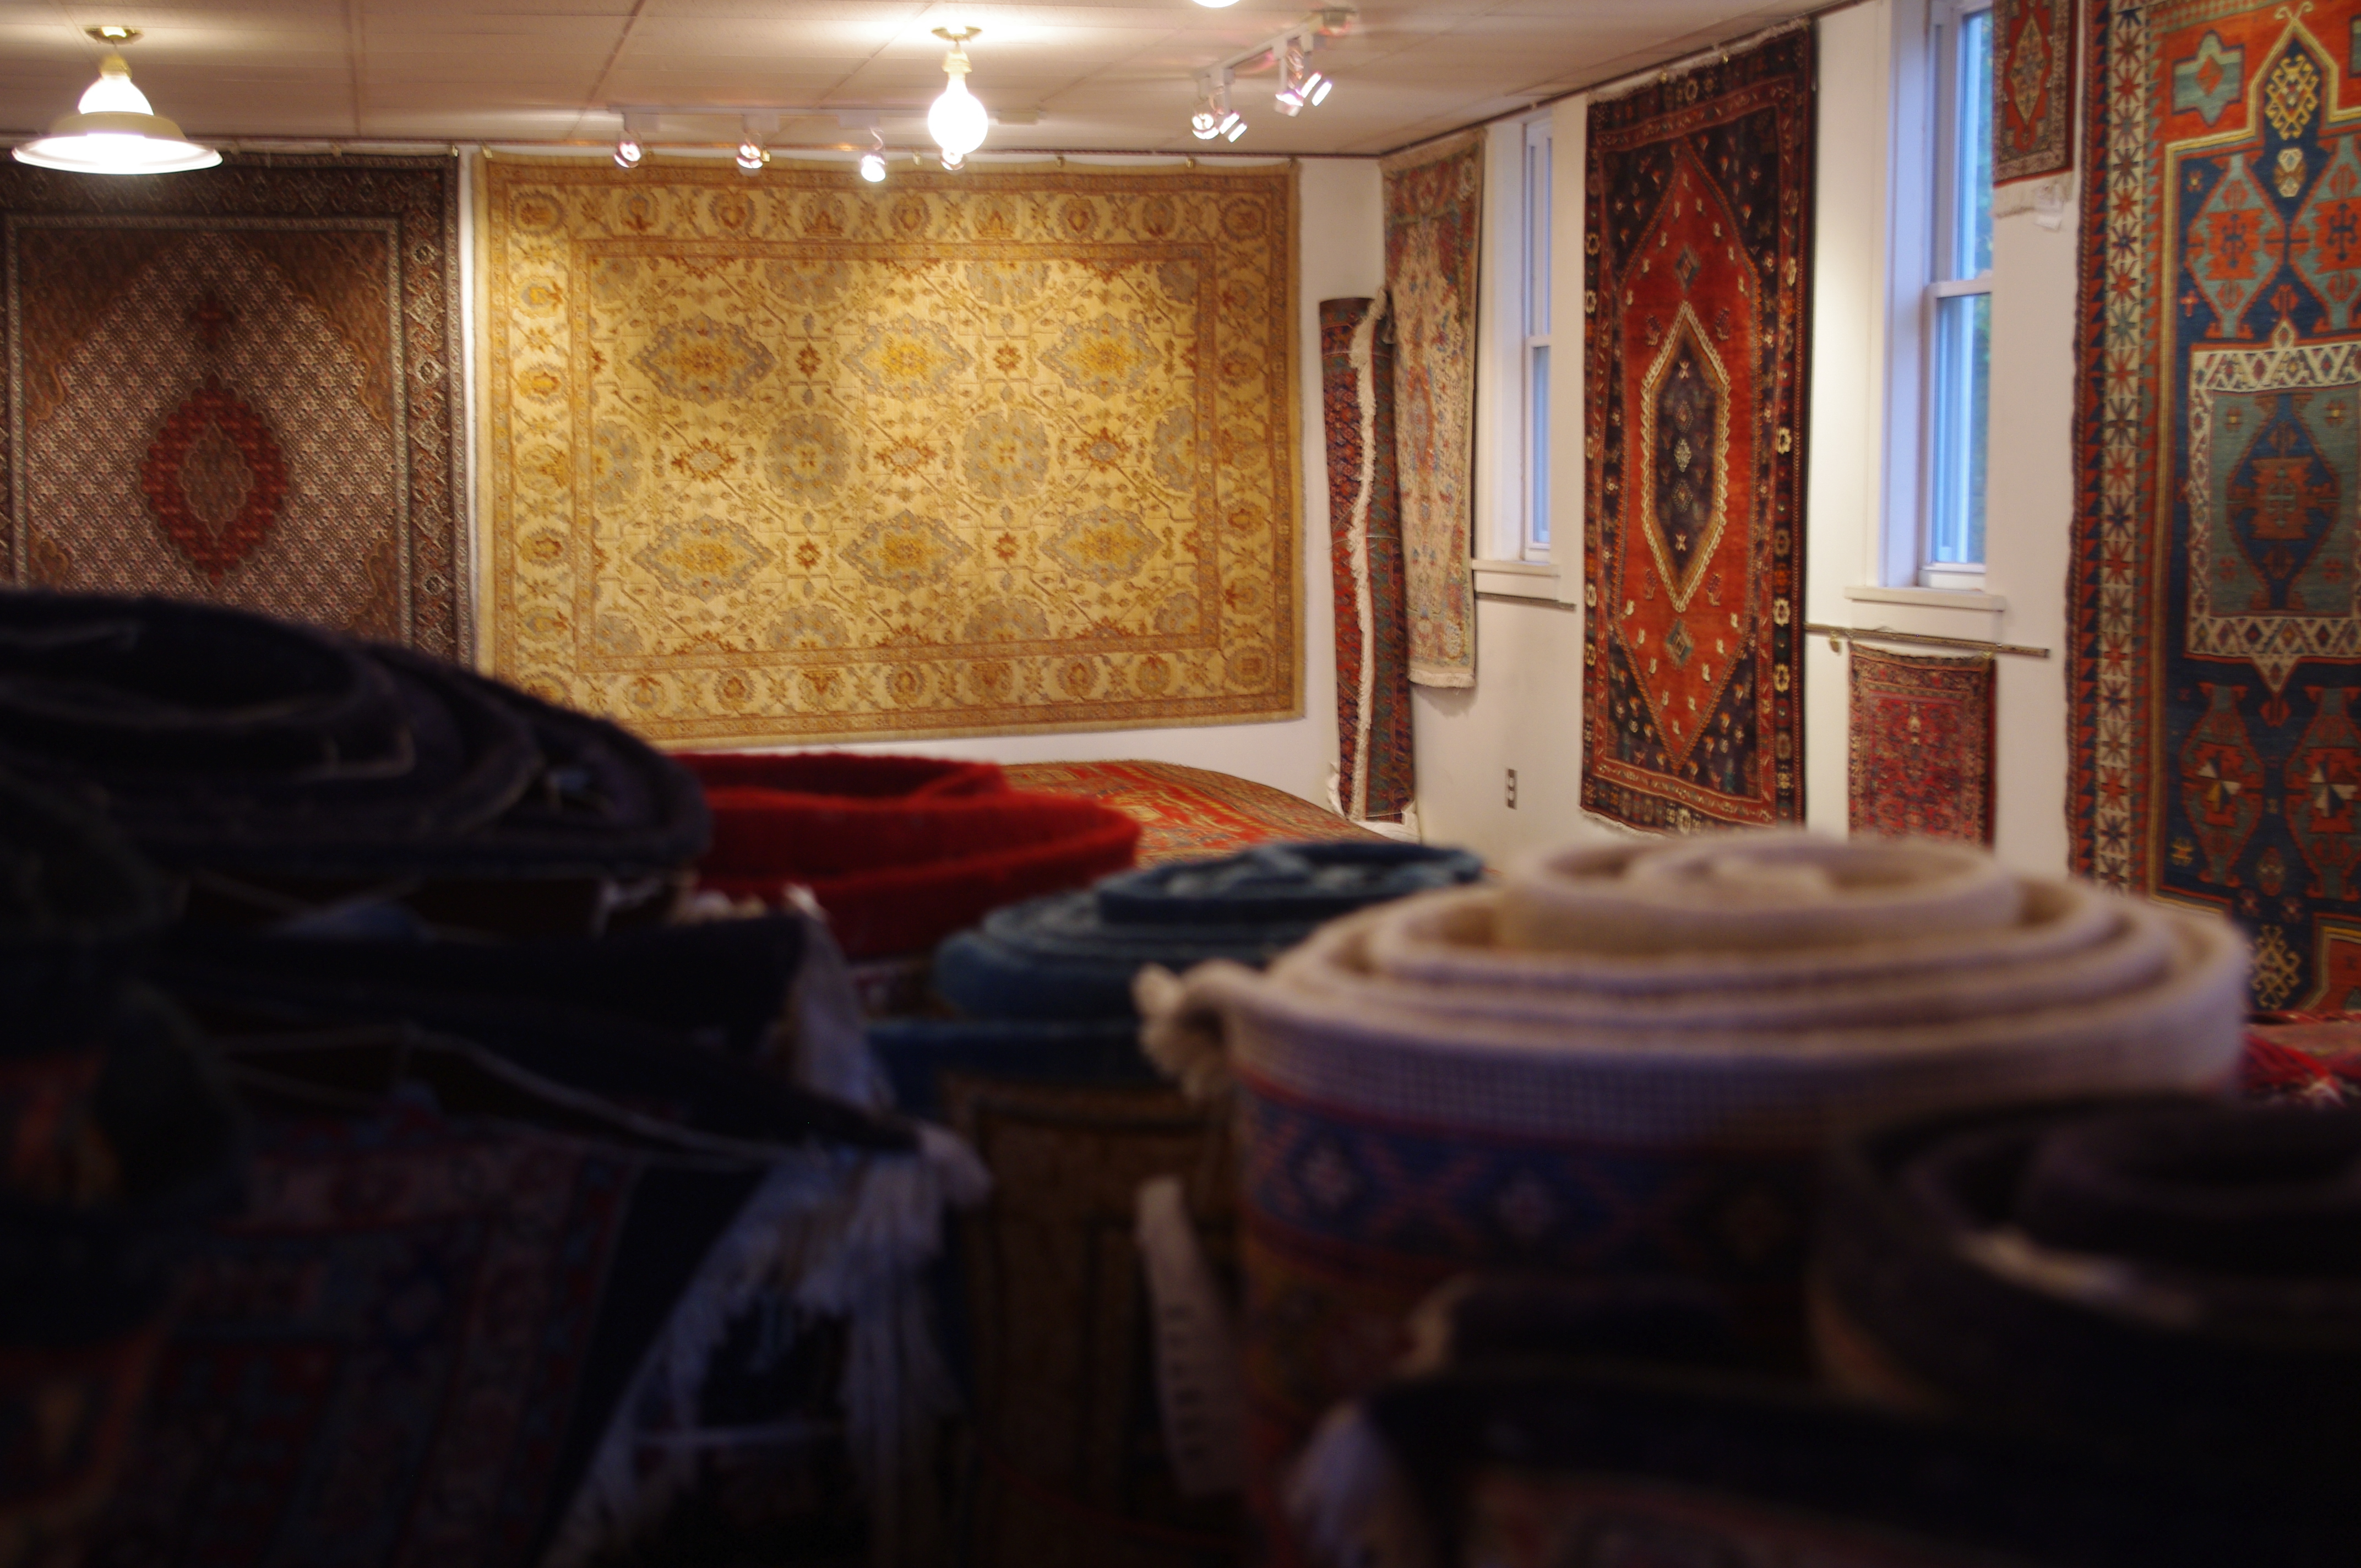 About New England Imported Rug Gallery